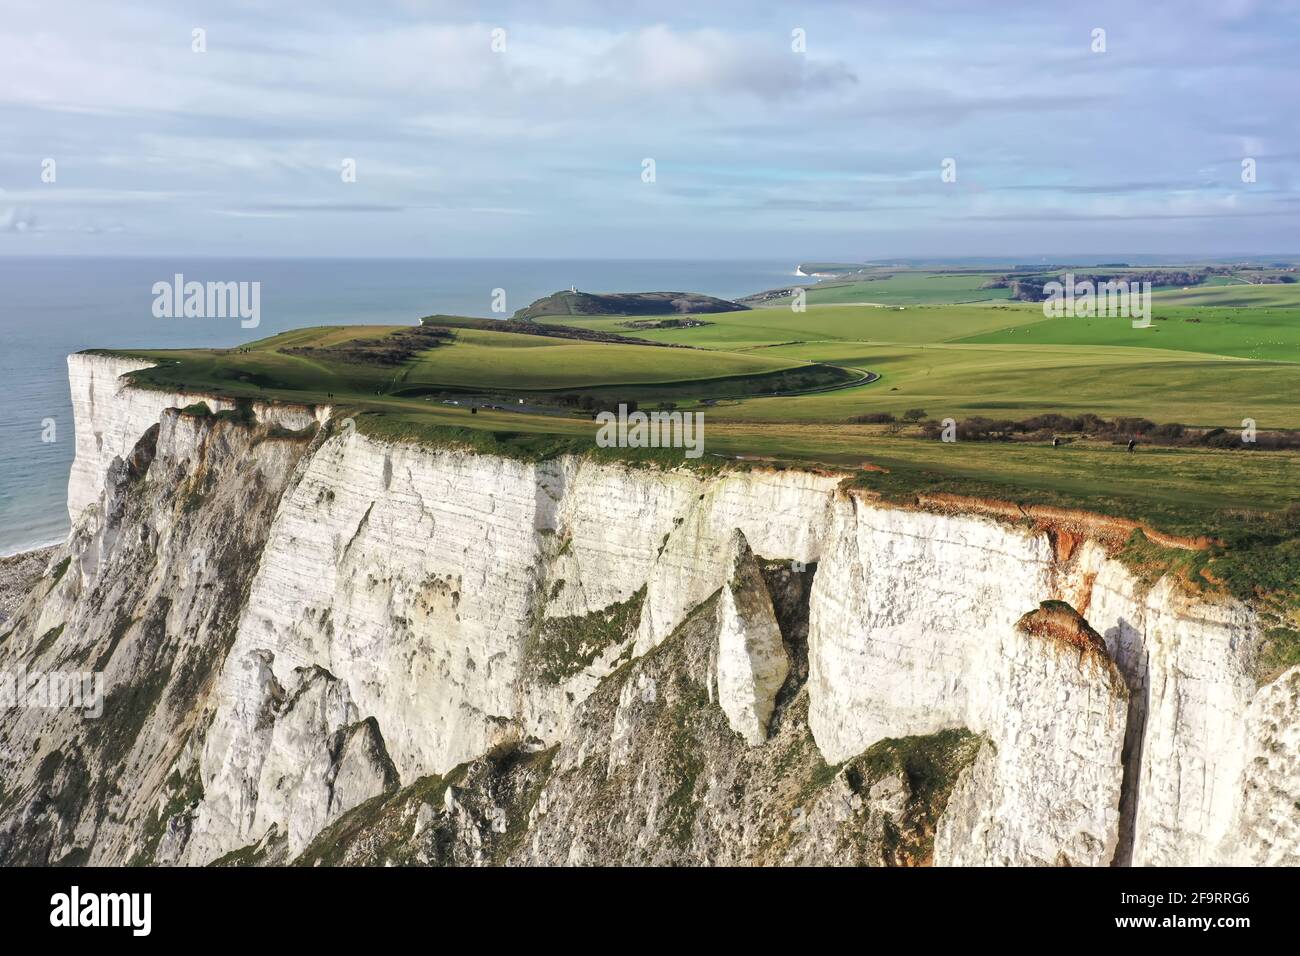 view of beachy head cliffs showing the erosion, beautiful cliff edge photo take from a drone, cliffs ready to fall showing the danger Stock Photo